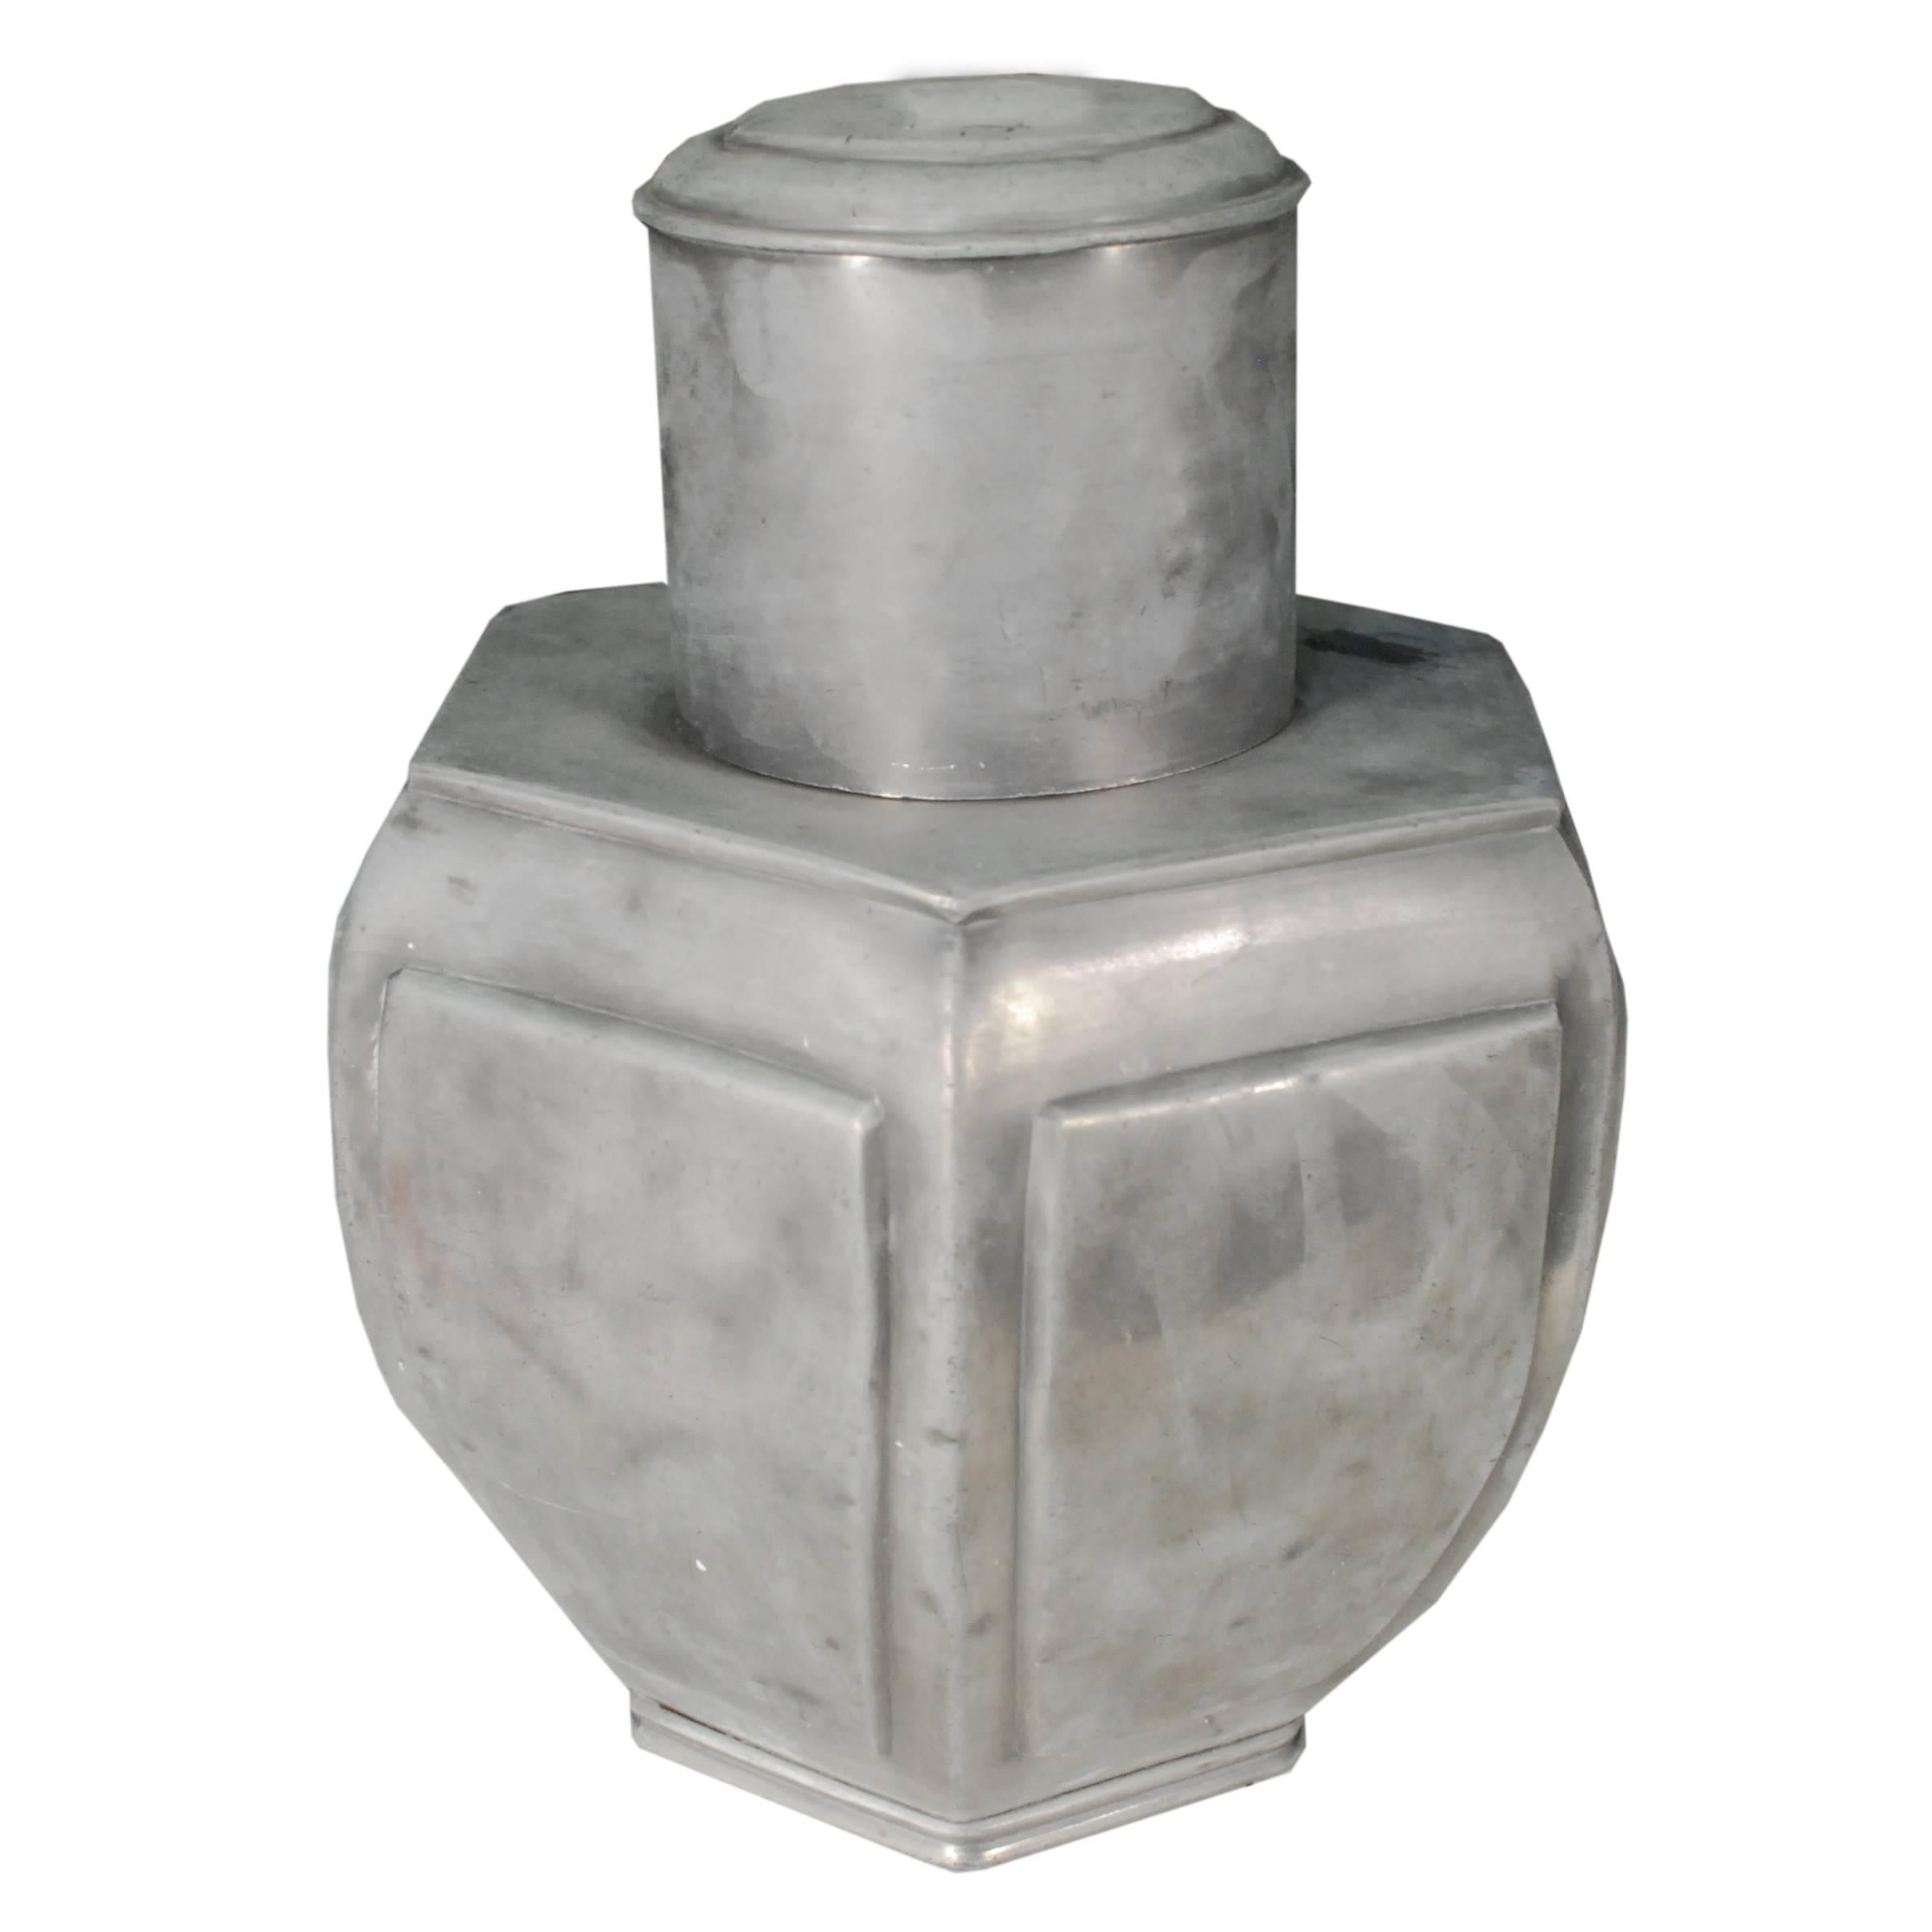 This finely made pewter tea canister was made during the early 1900s in Guangdong, China, which was considered by many scholars to be the birthplace of tea. The beverage quickly became popular across much of Asia, but didn’t catch on globally until